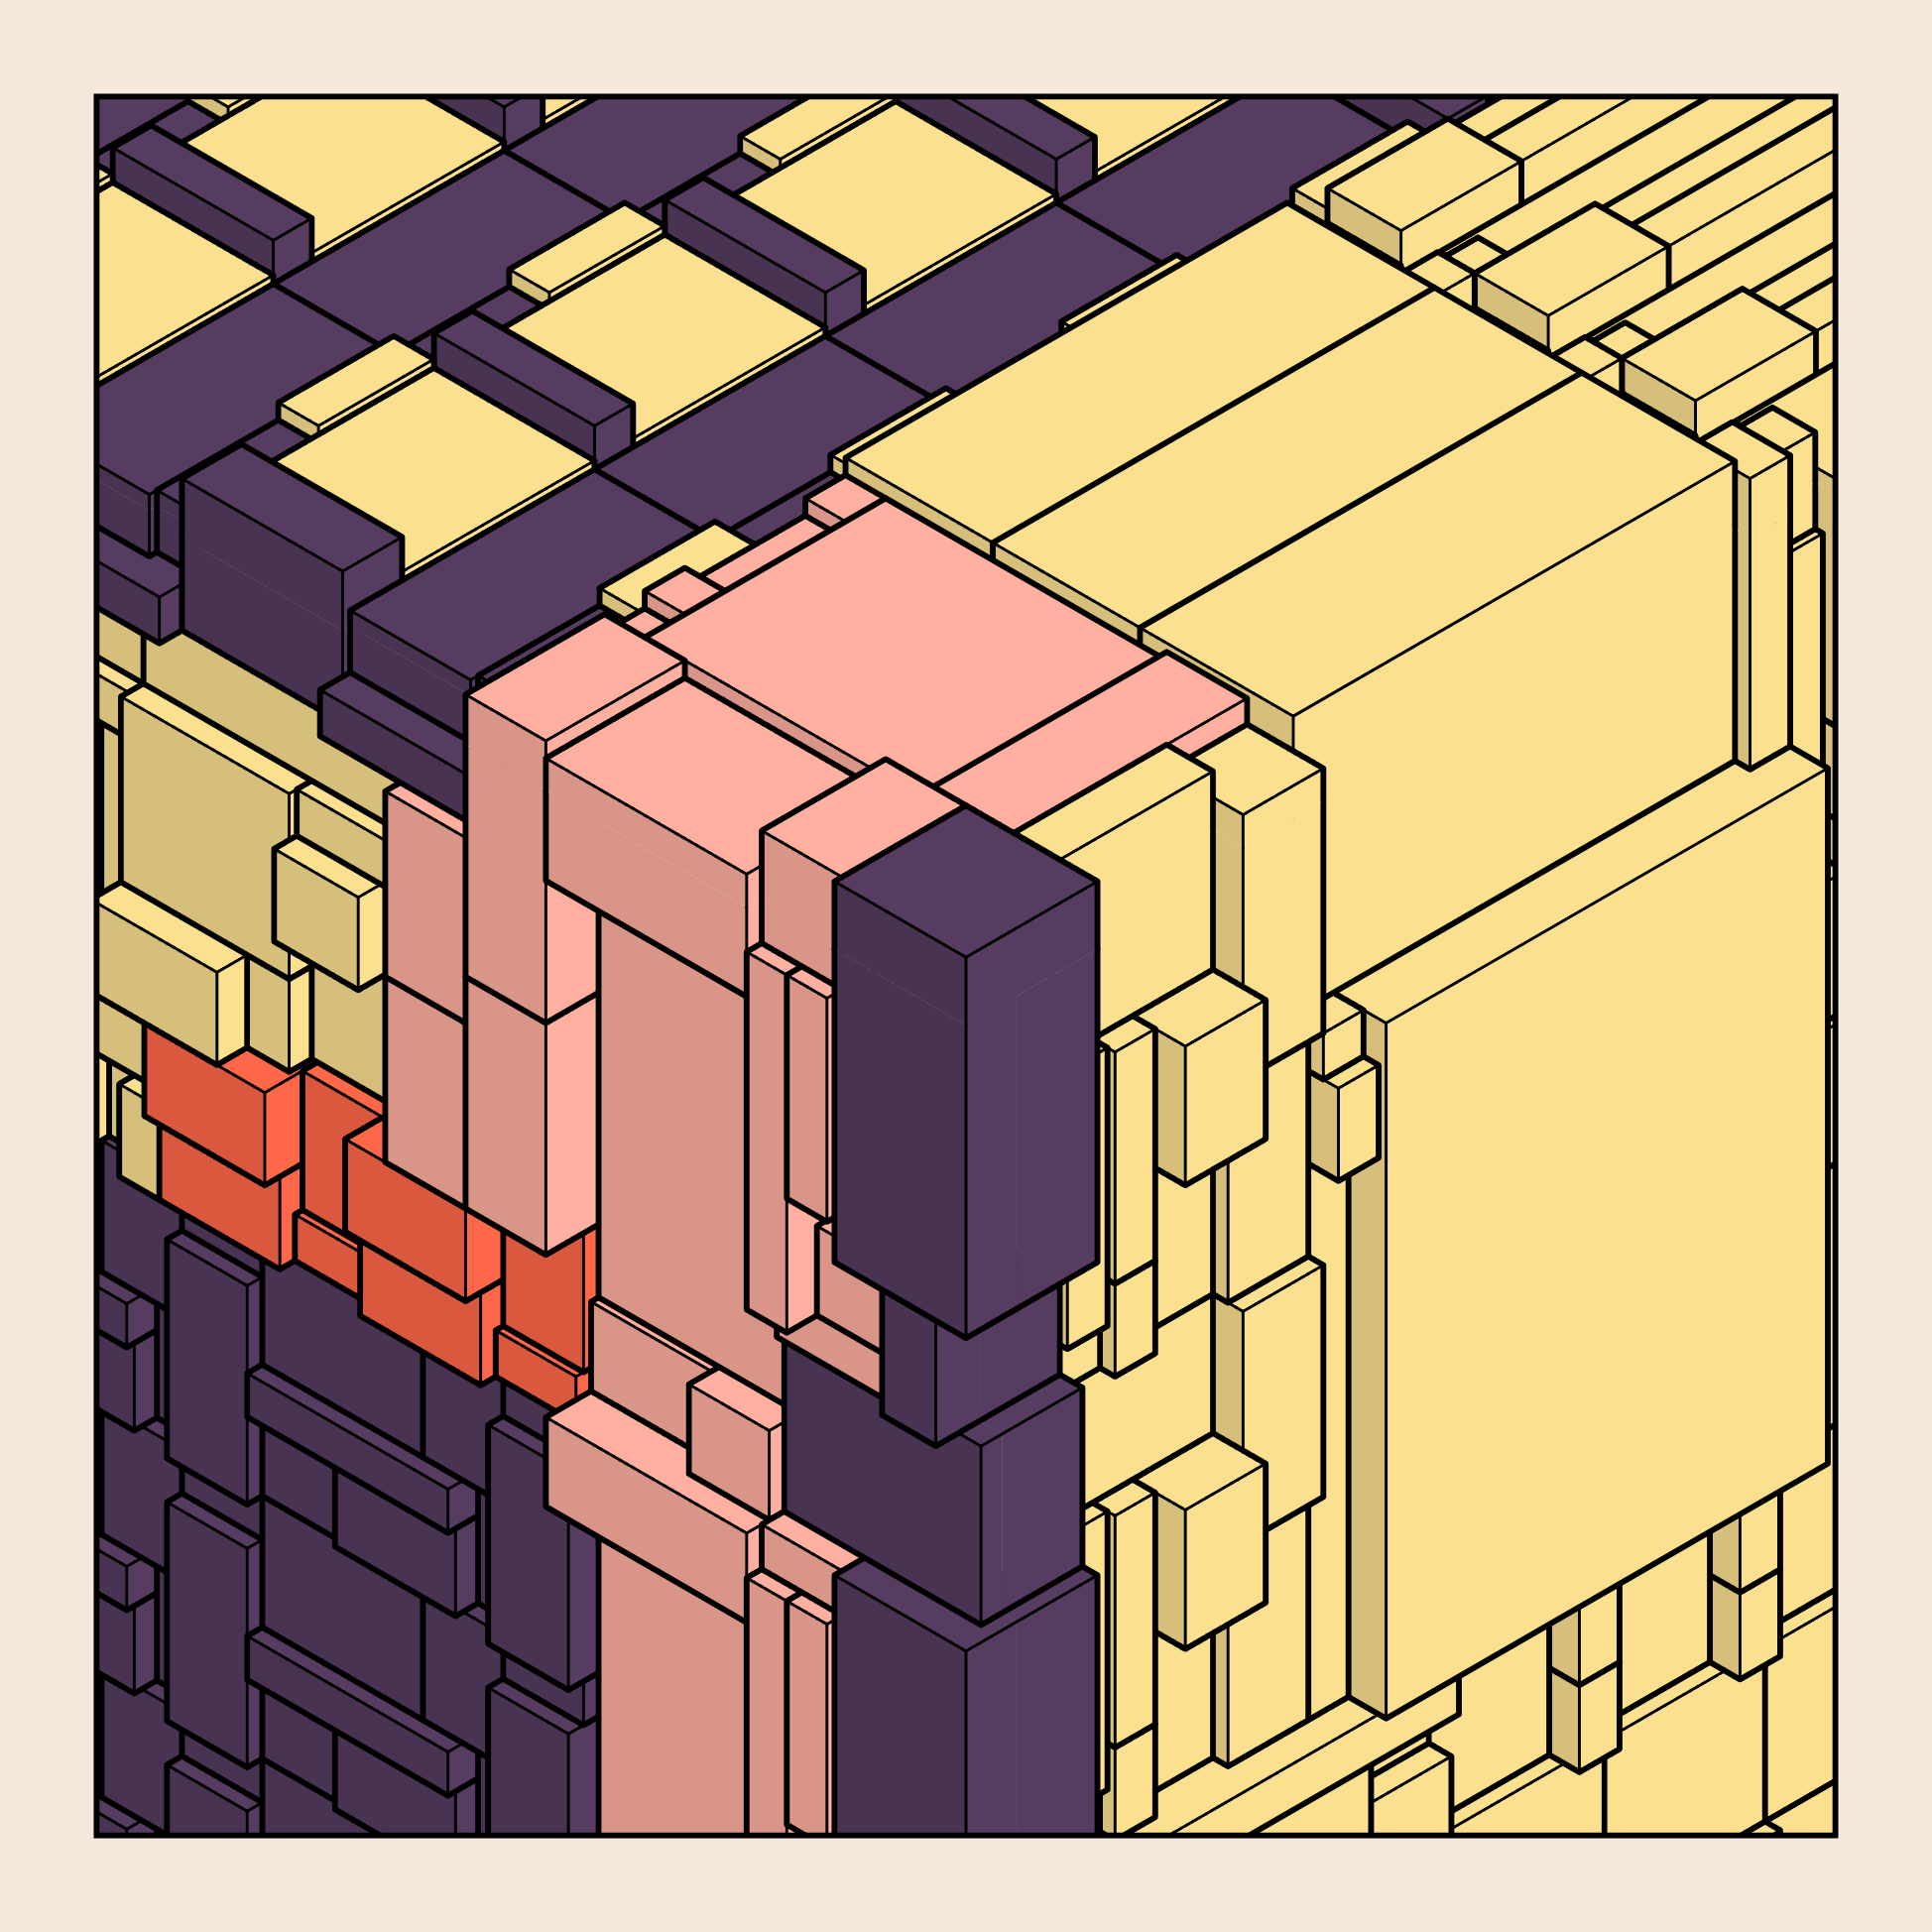 An abstract digital composition of quadrilateral volumes in shades of purple, pink, and yellow